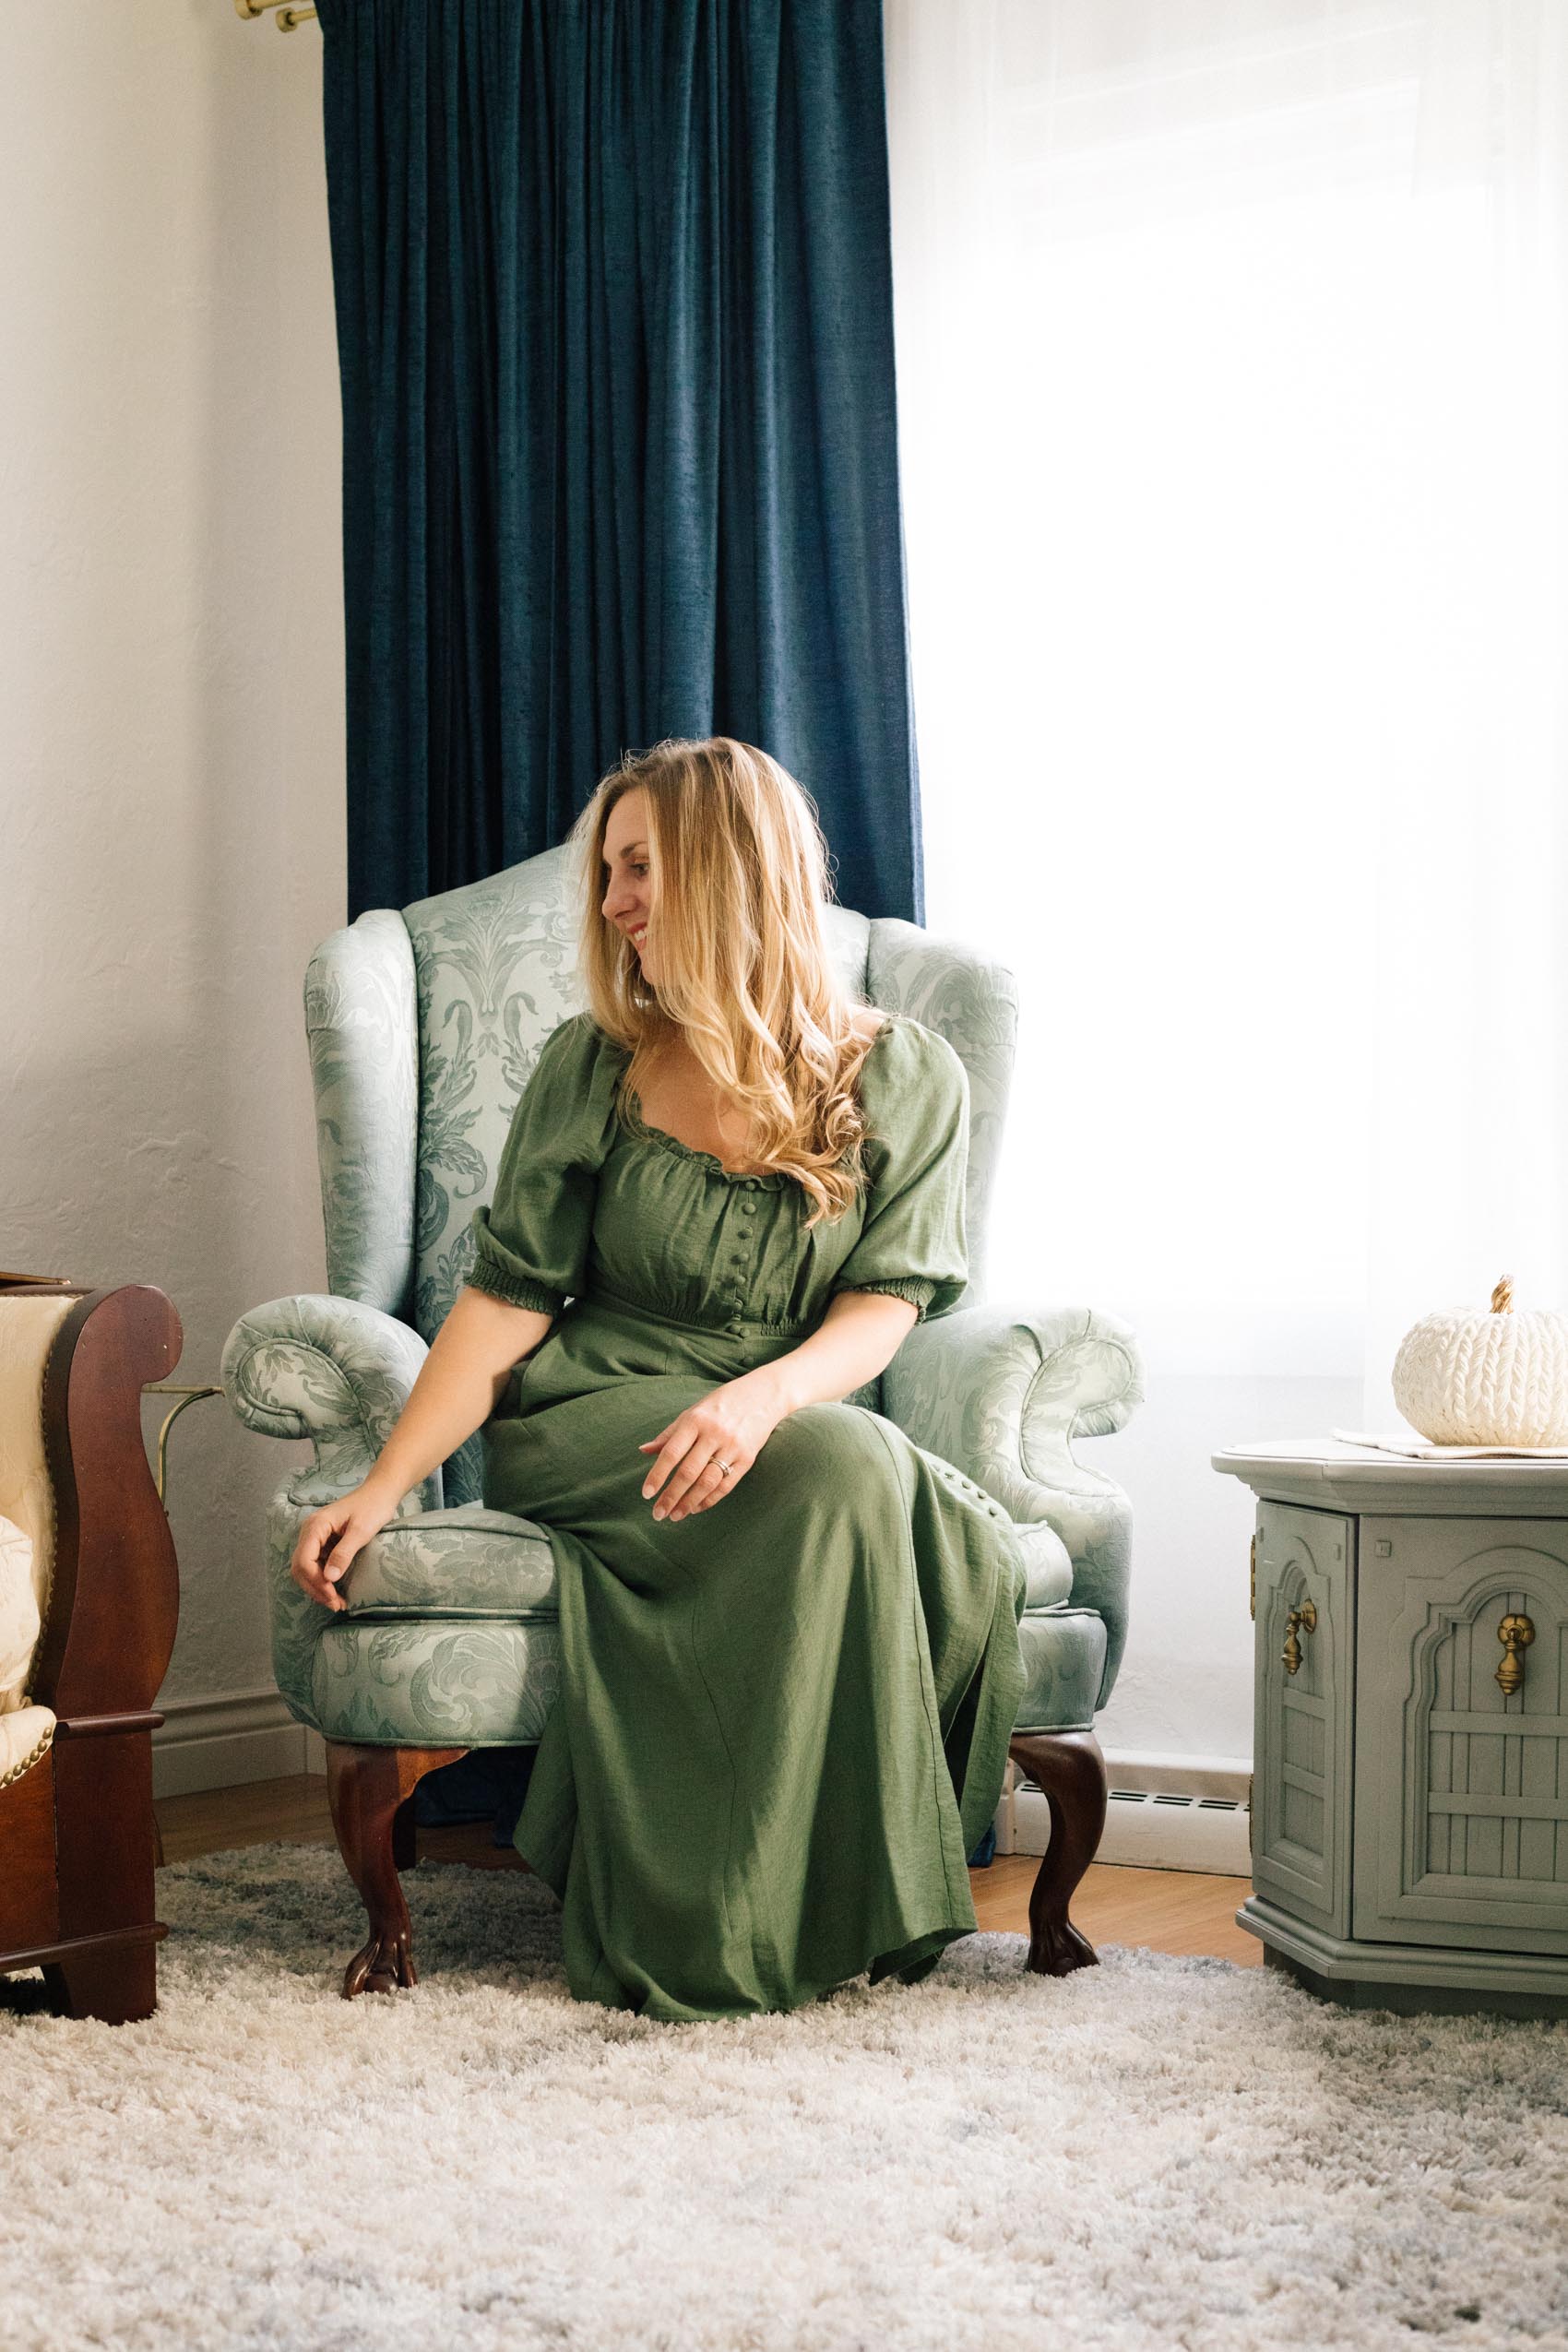 Women in a green dress sitting on a vintage blue wing back chair in front of dark blue curtains